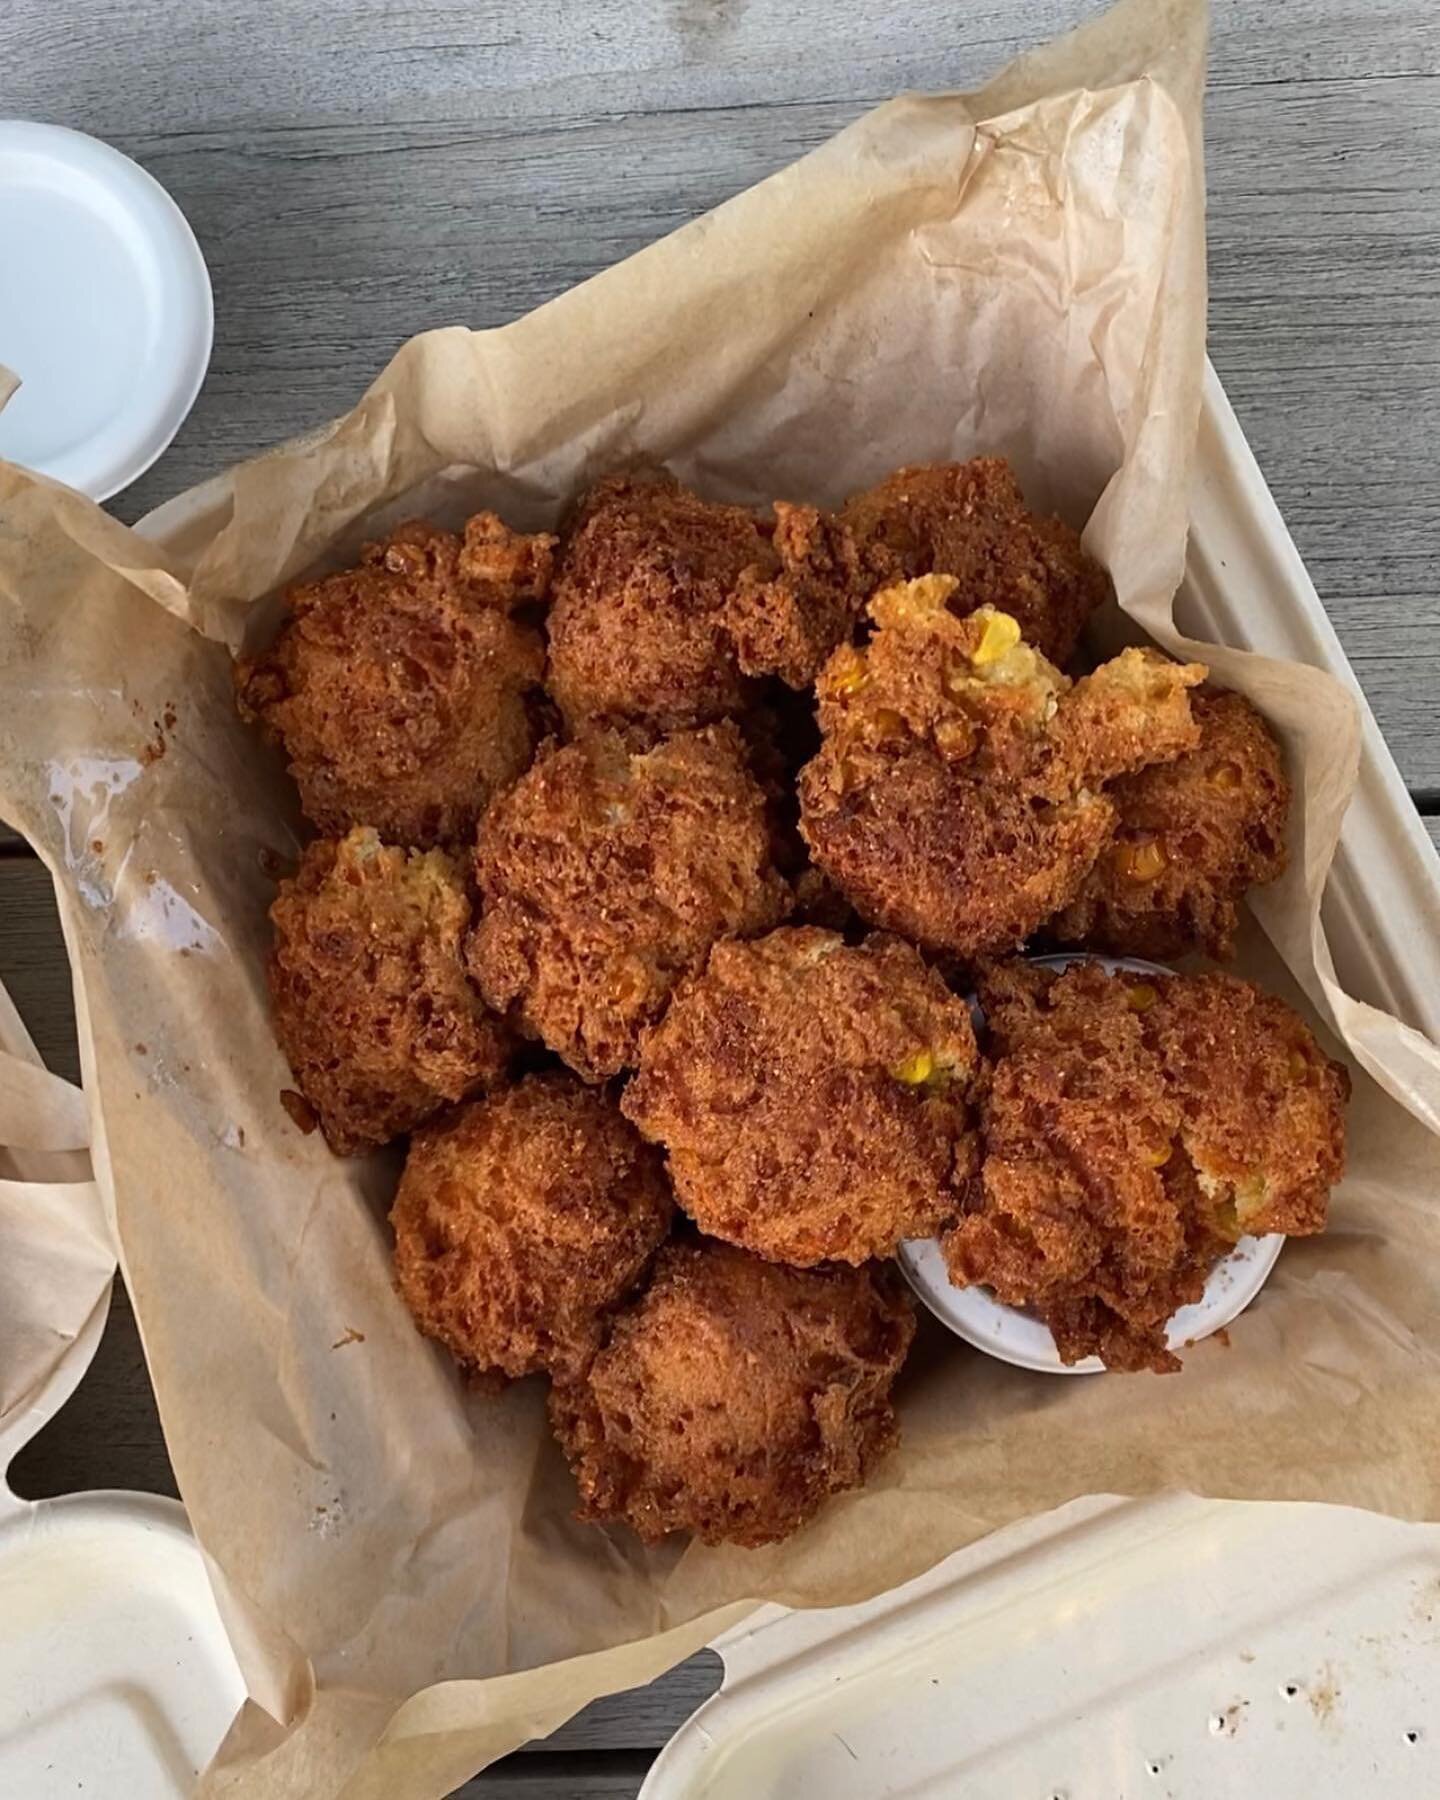 Fridays are for corn fritters. We&rsquo;ve got your comfort food ready to go with you wherever your weekend takes you! Order online 🔥